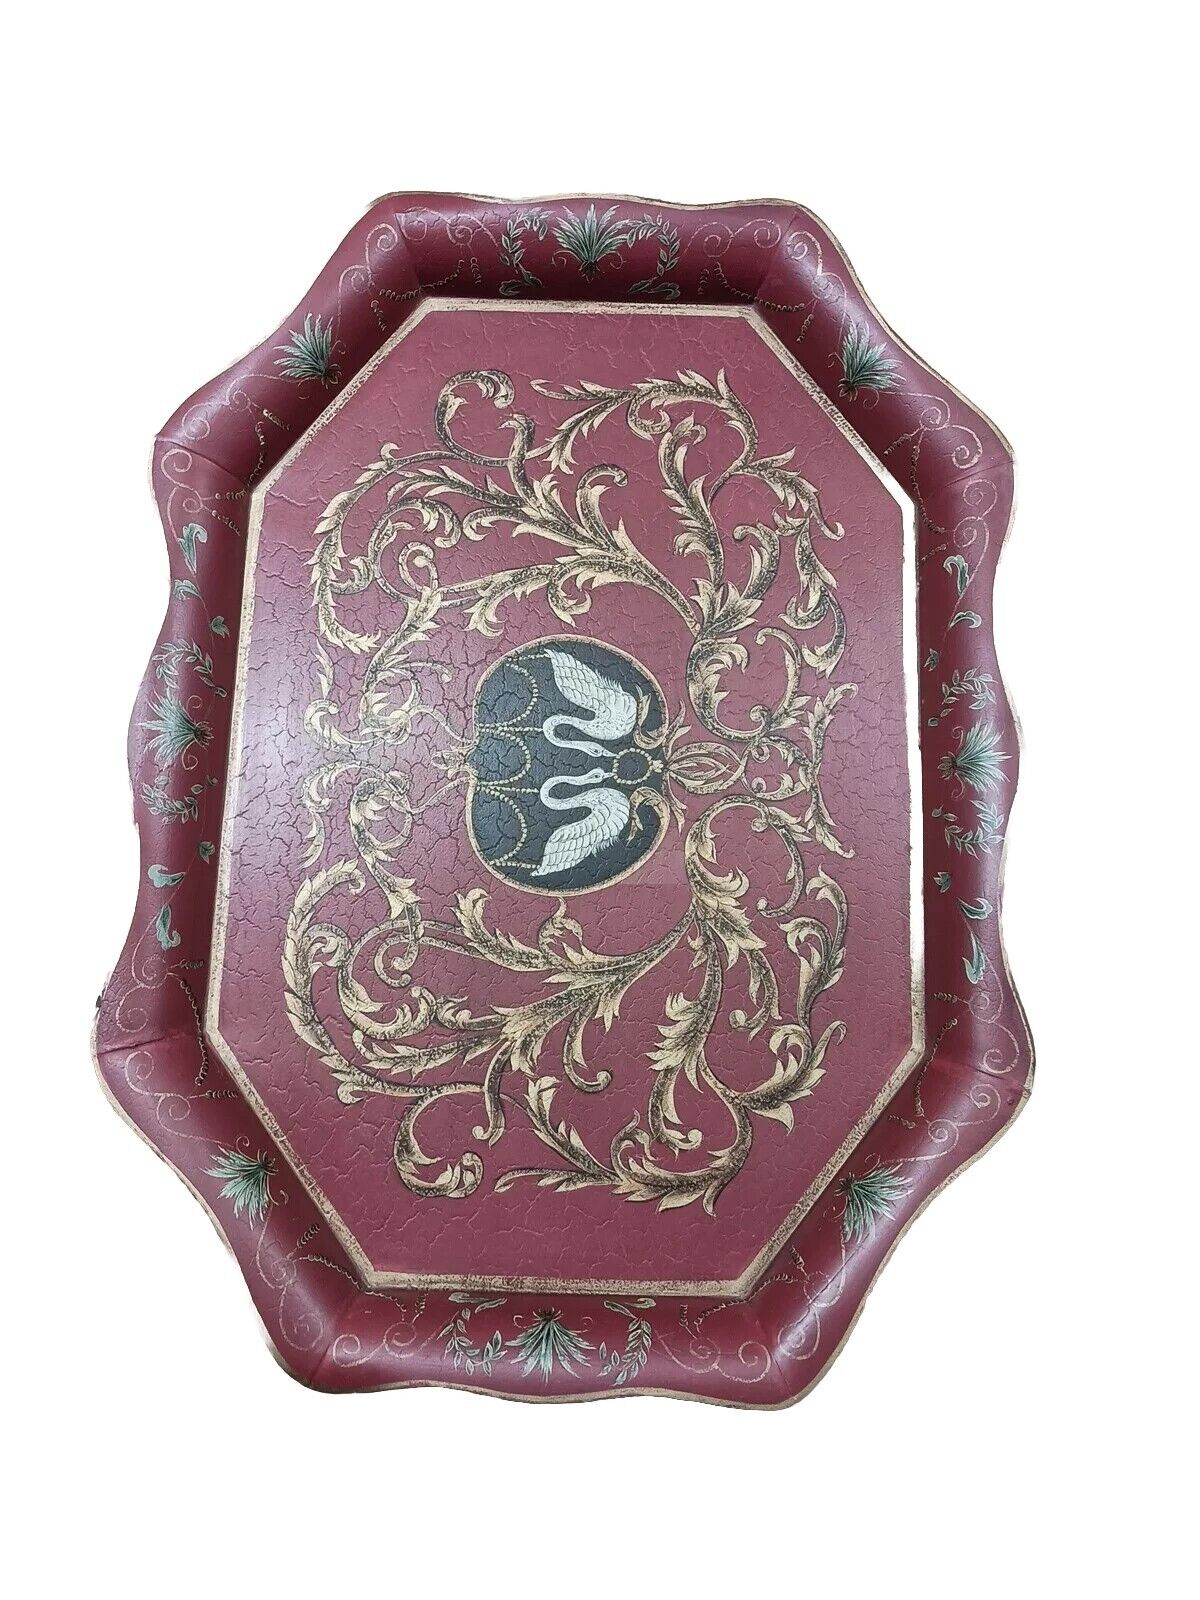 Vintage Serving Tray Pennsylvania Dutch Inspired Red Swan HandPainted Sheet Iron